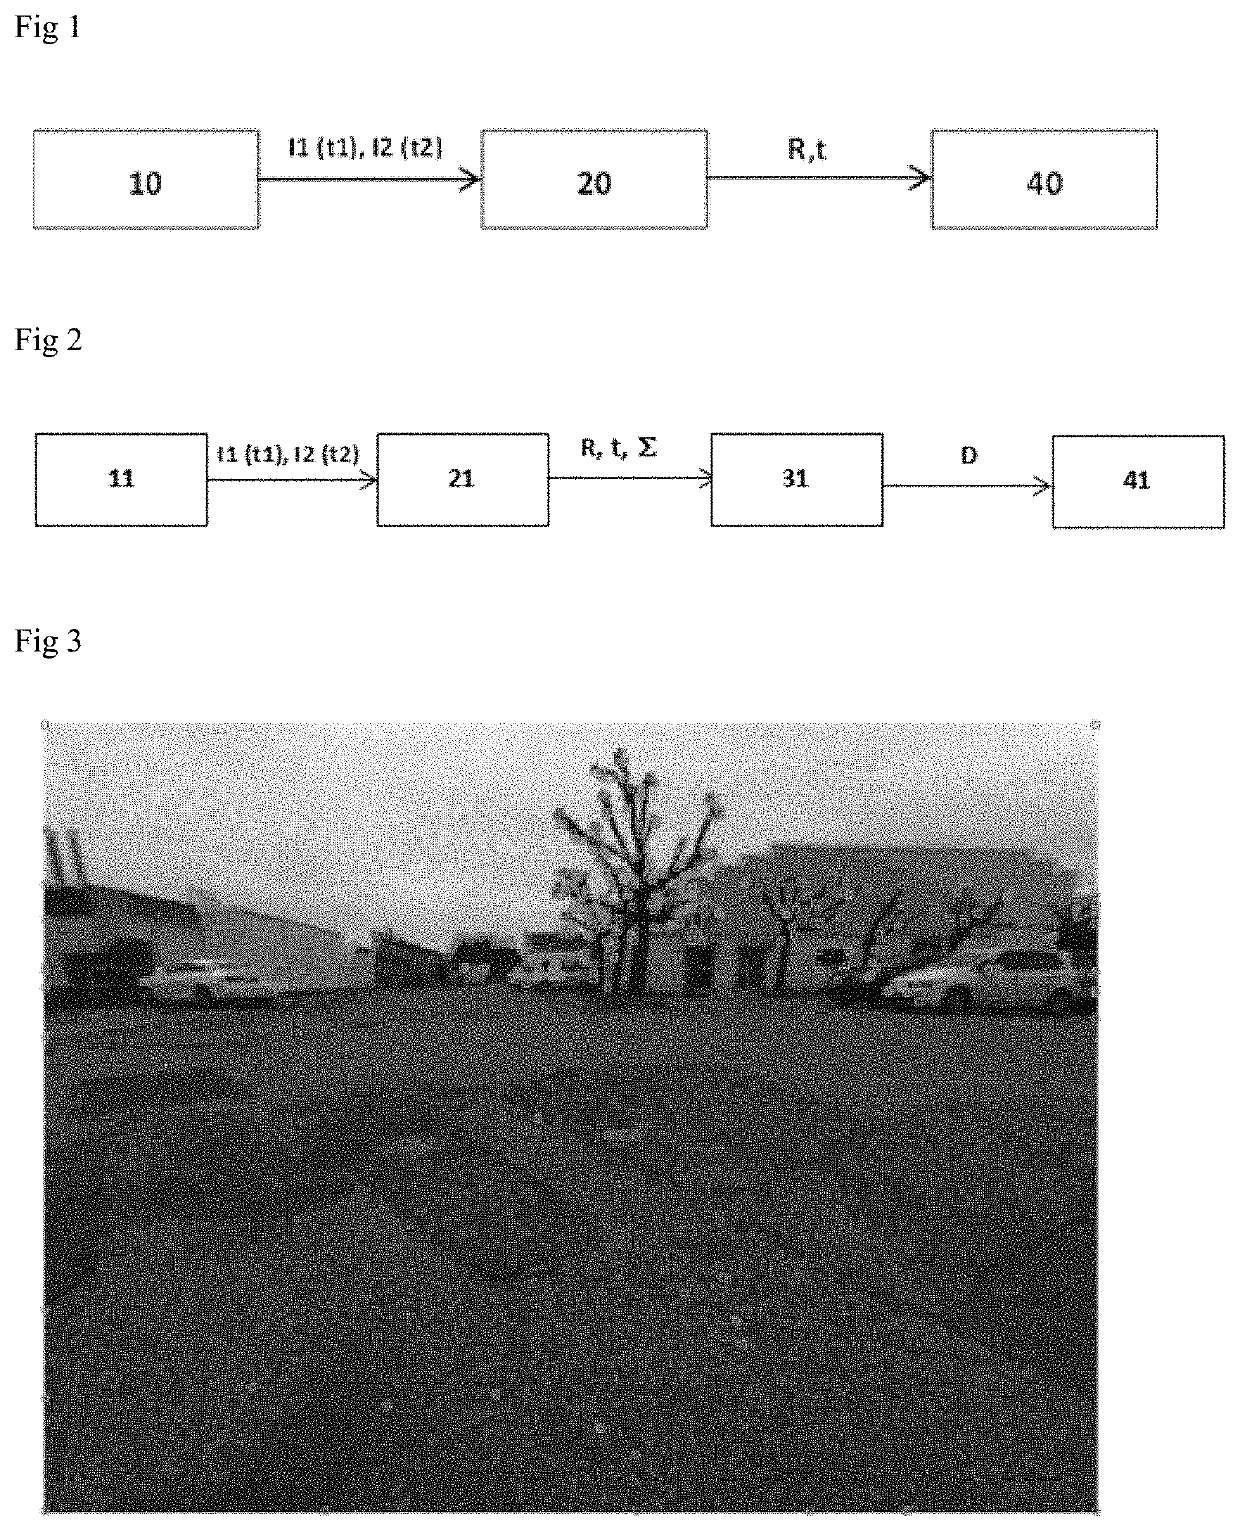 Method for determining a protection radius of a vision-based navigation system